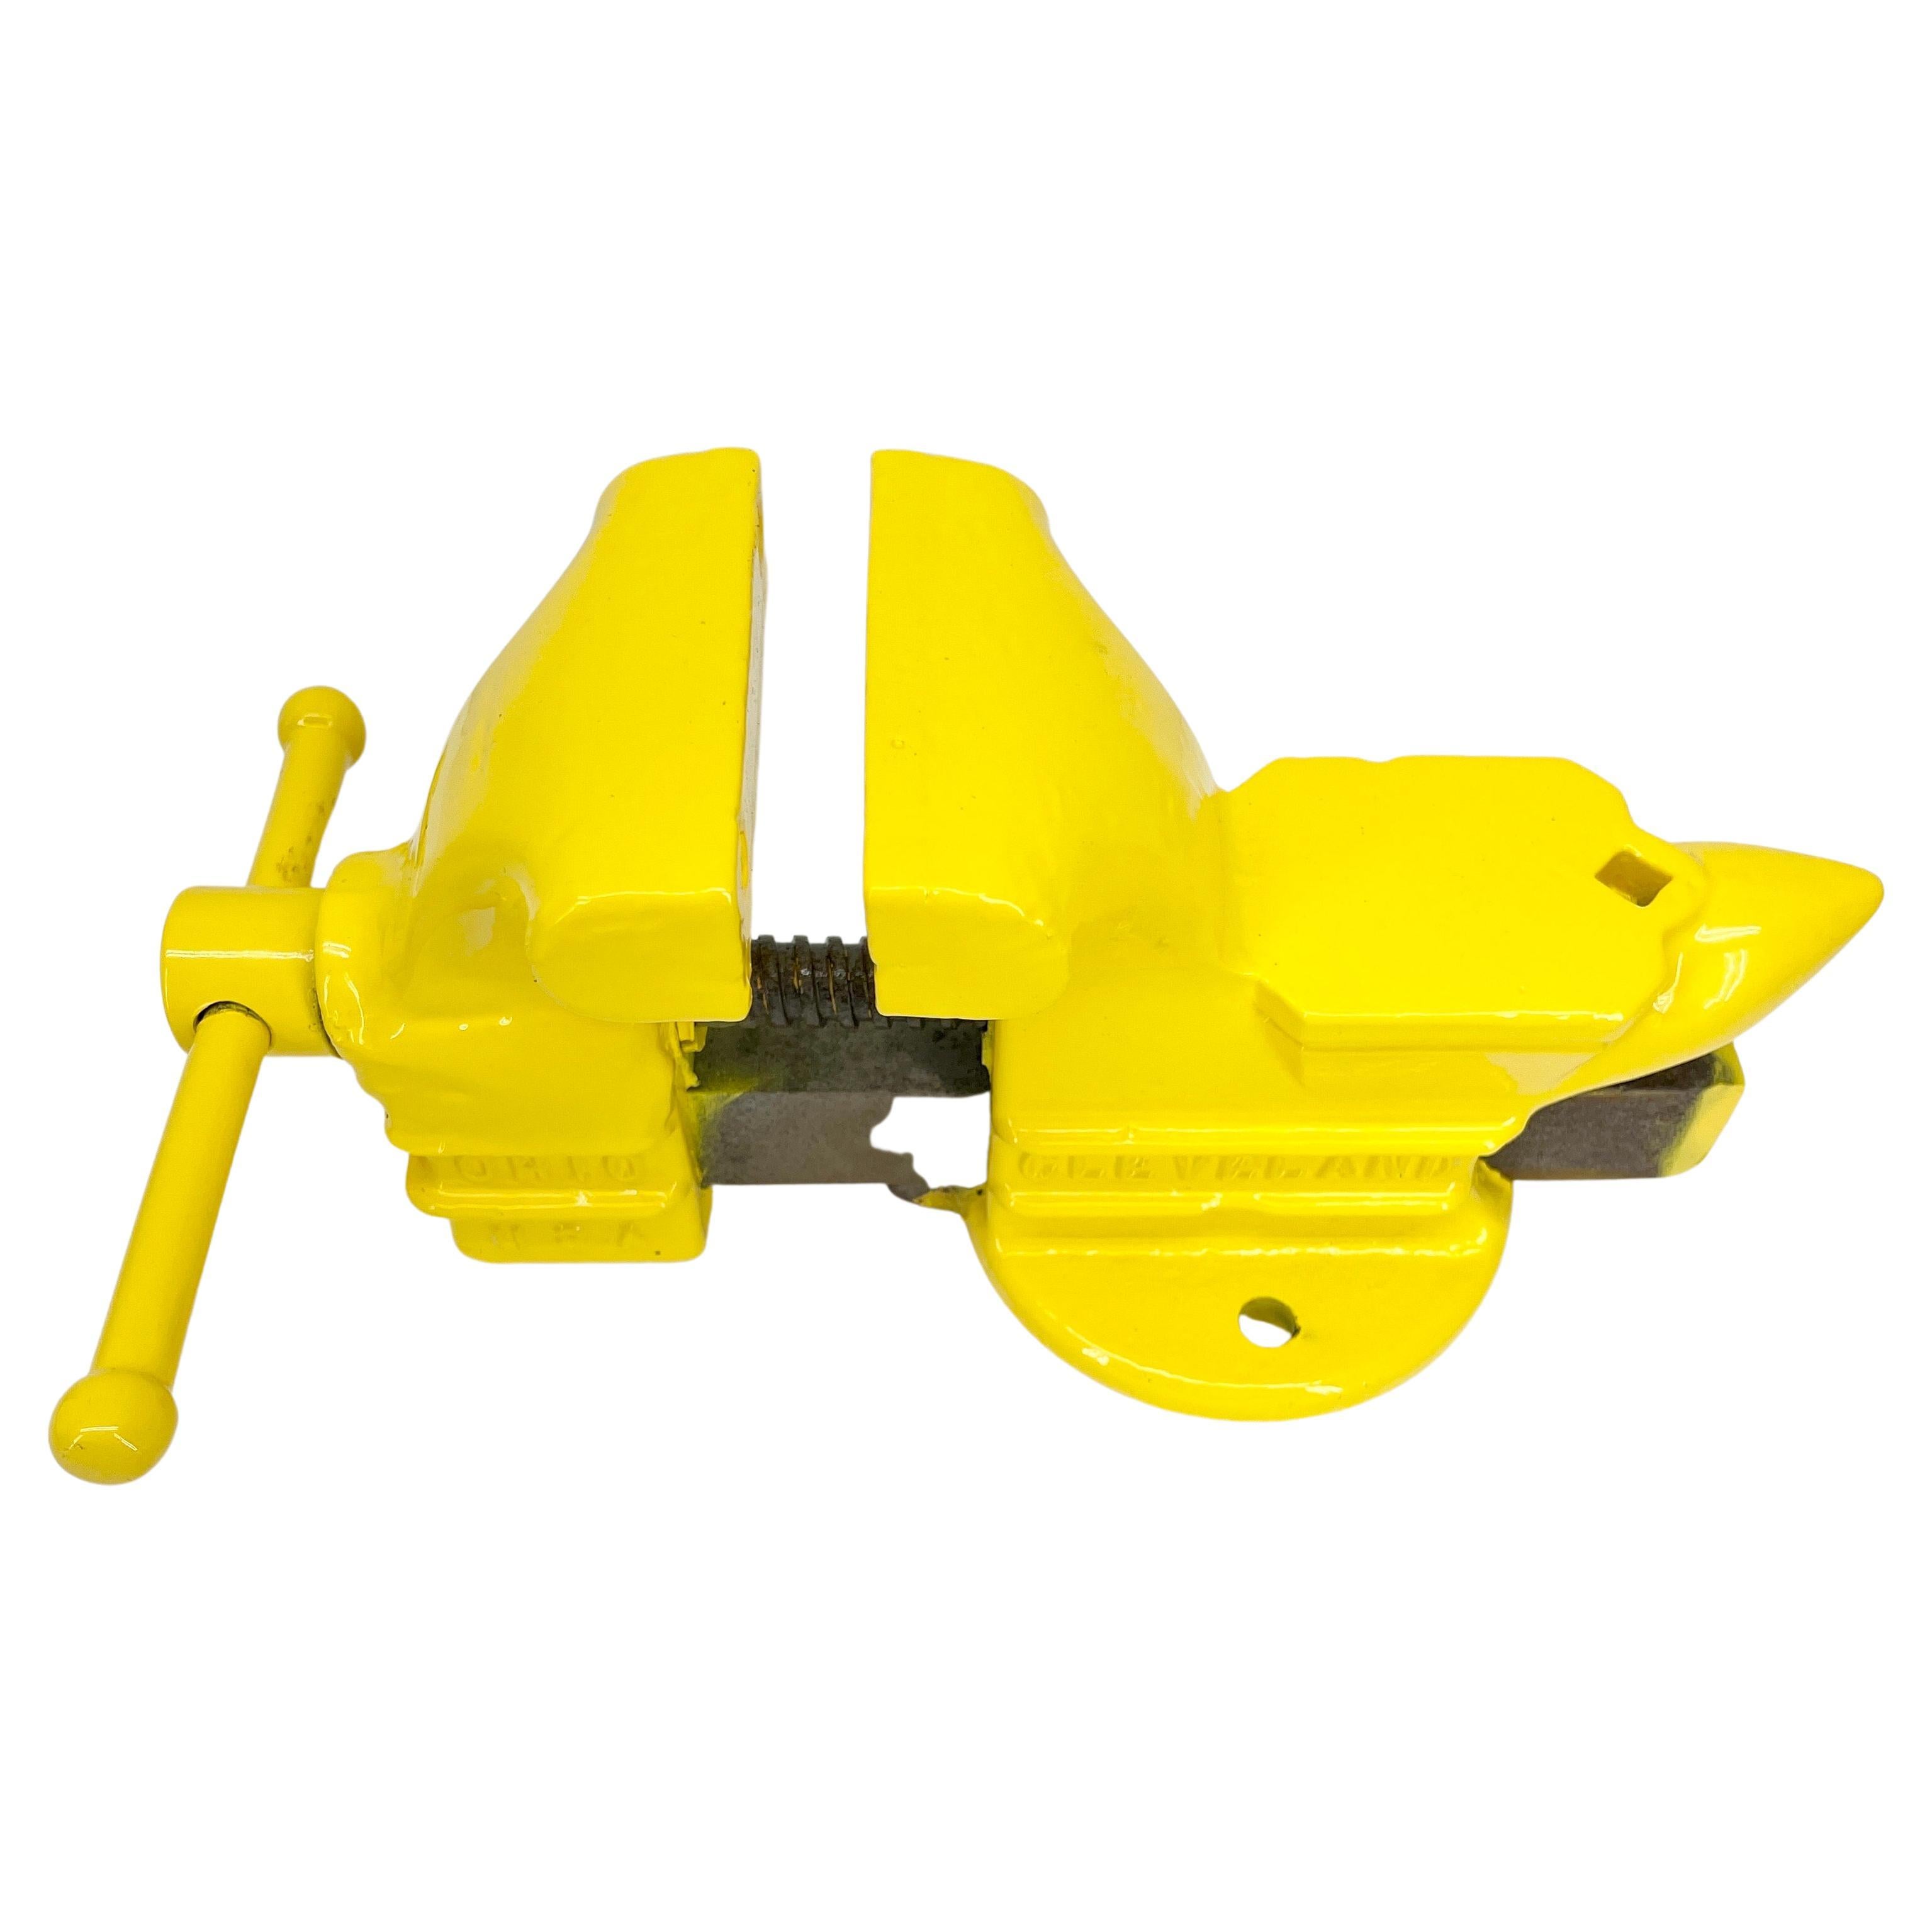 American Vintage Tool Vice, Powder Coated Bright Yellow Desk Accessory For Sale